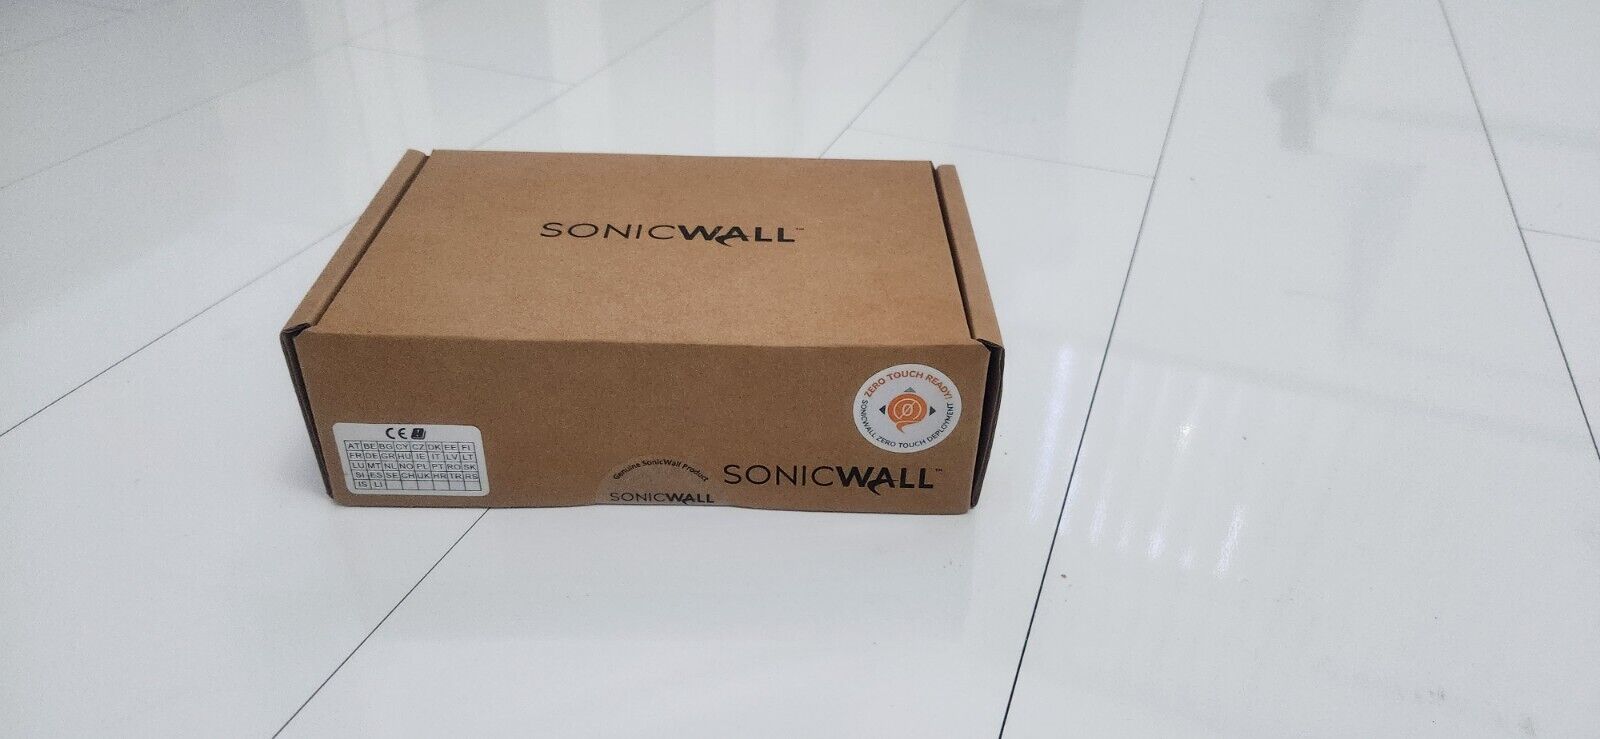 SonicWALL SonicWave 231c Network Security Wireless Access Point